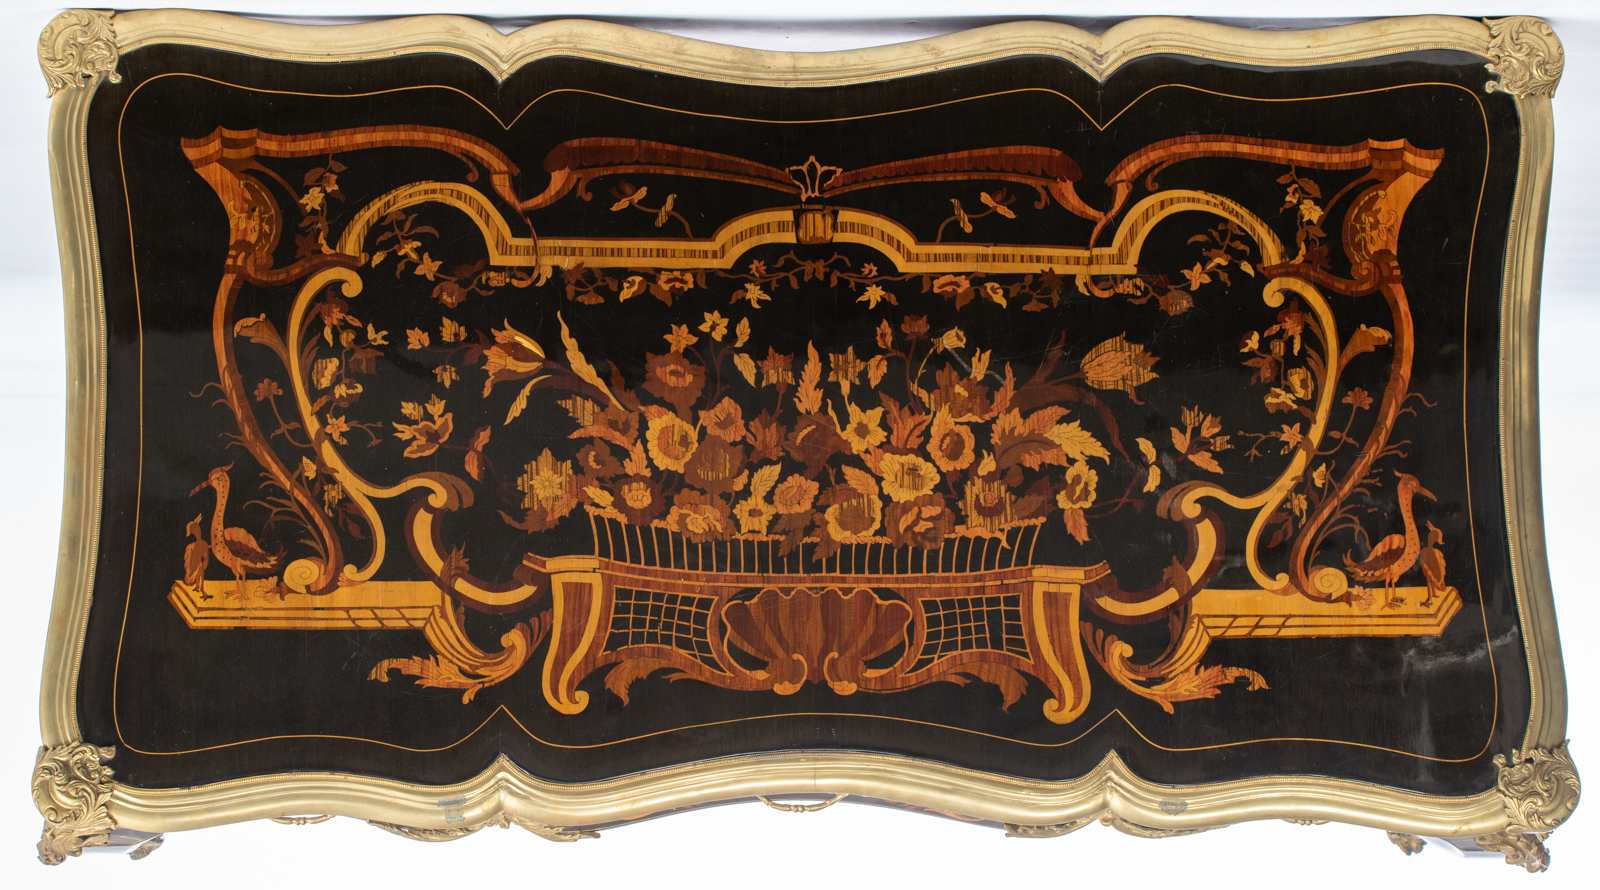 A fine Louis XV style lacquered bureau plat, decorated with gilt bronze mounts and rich marquetry of - Image 6 of 8